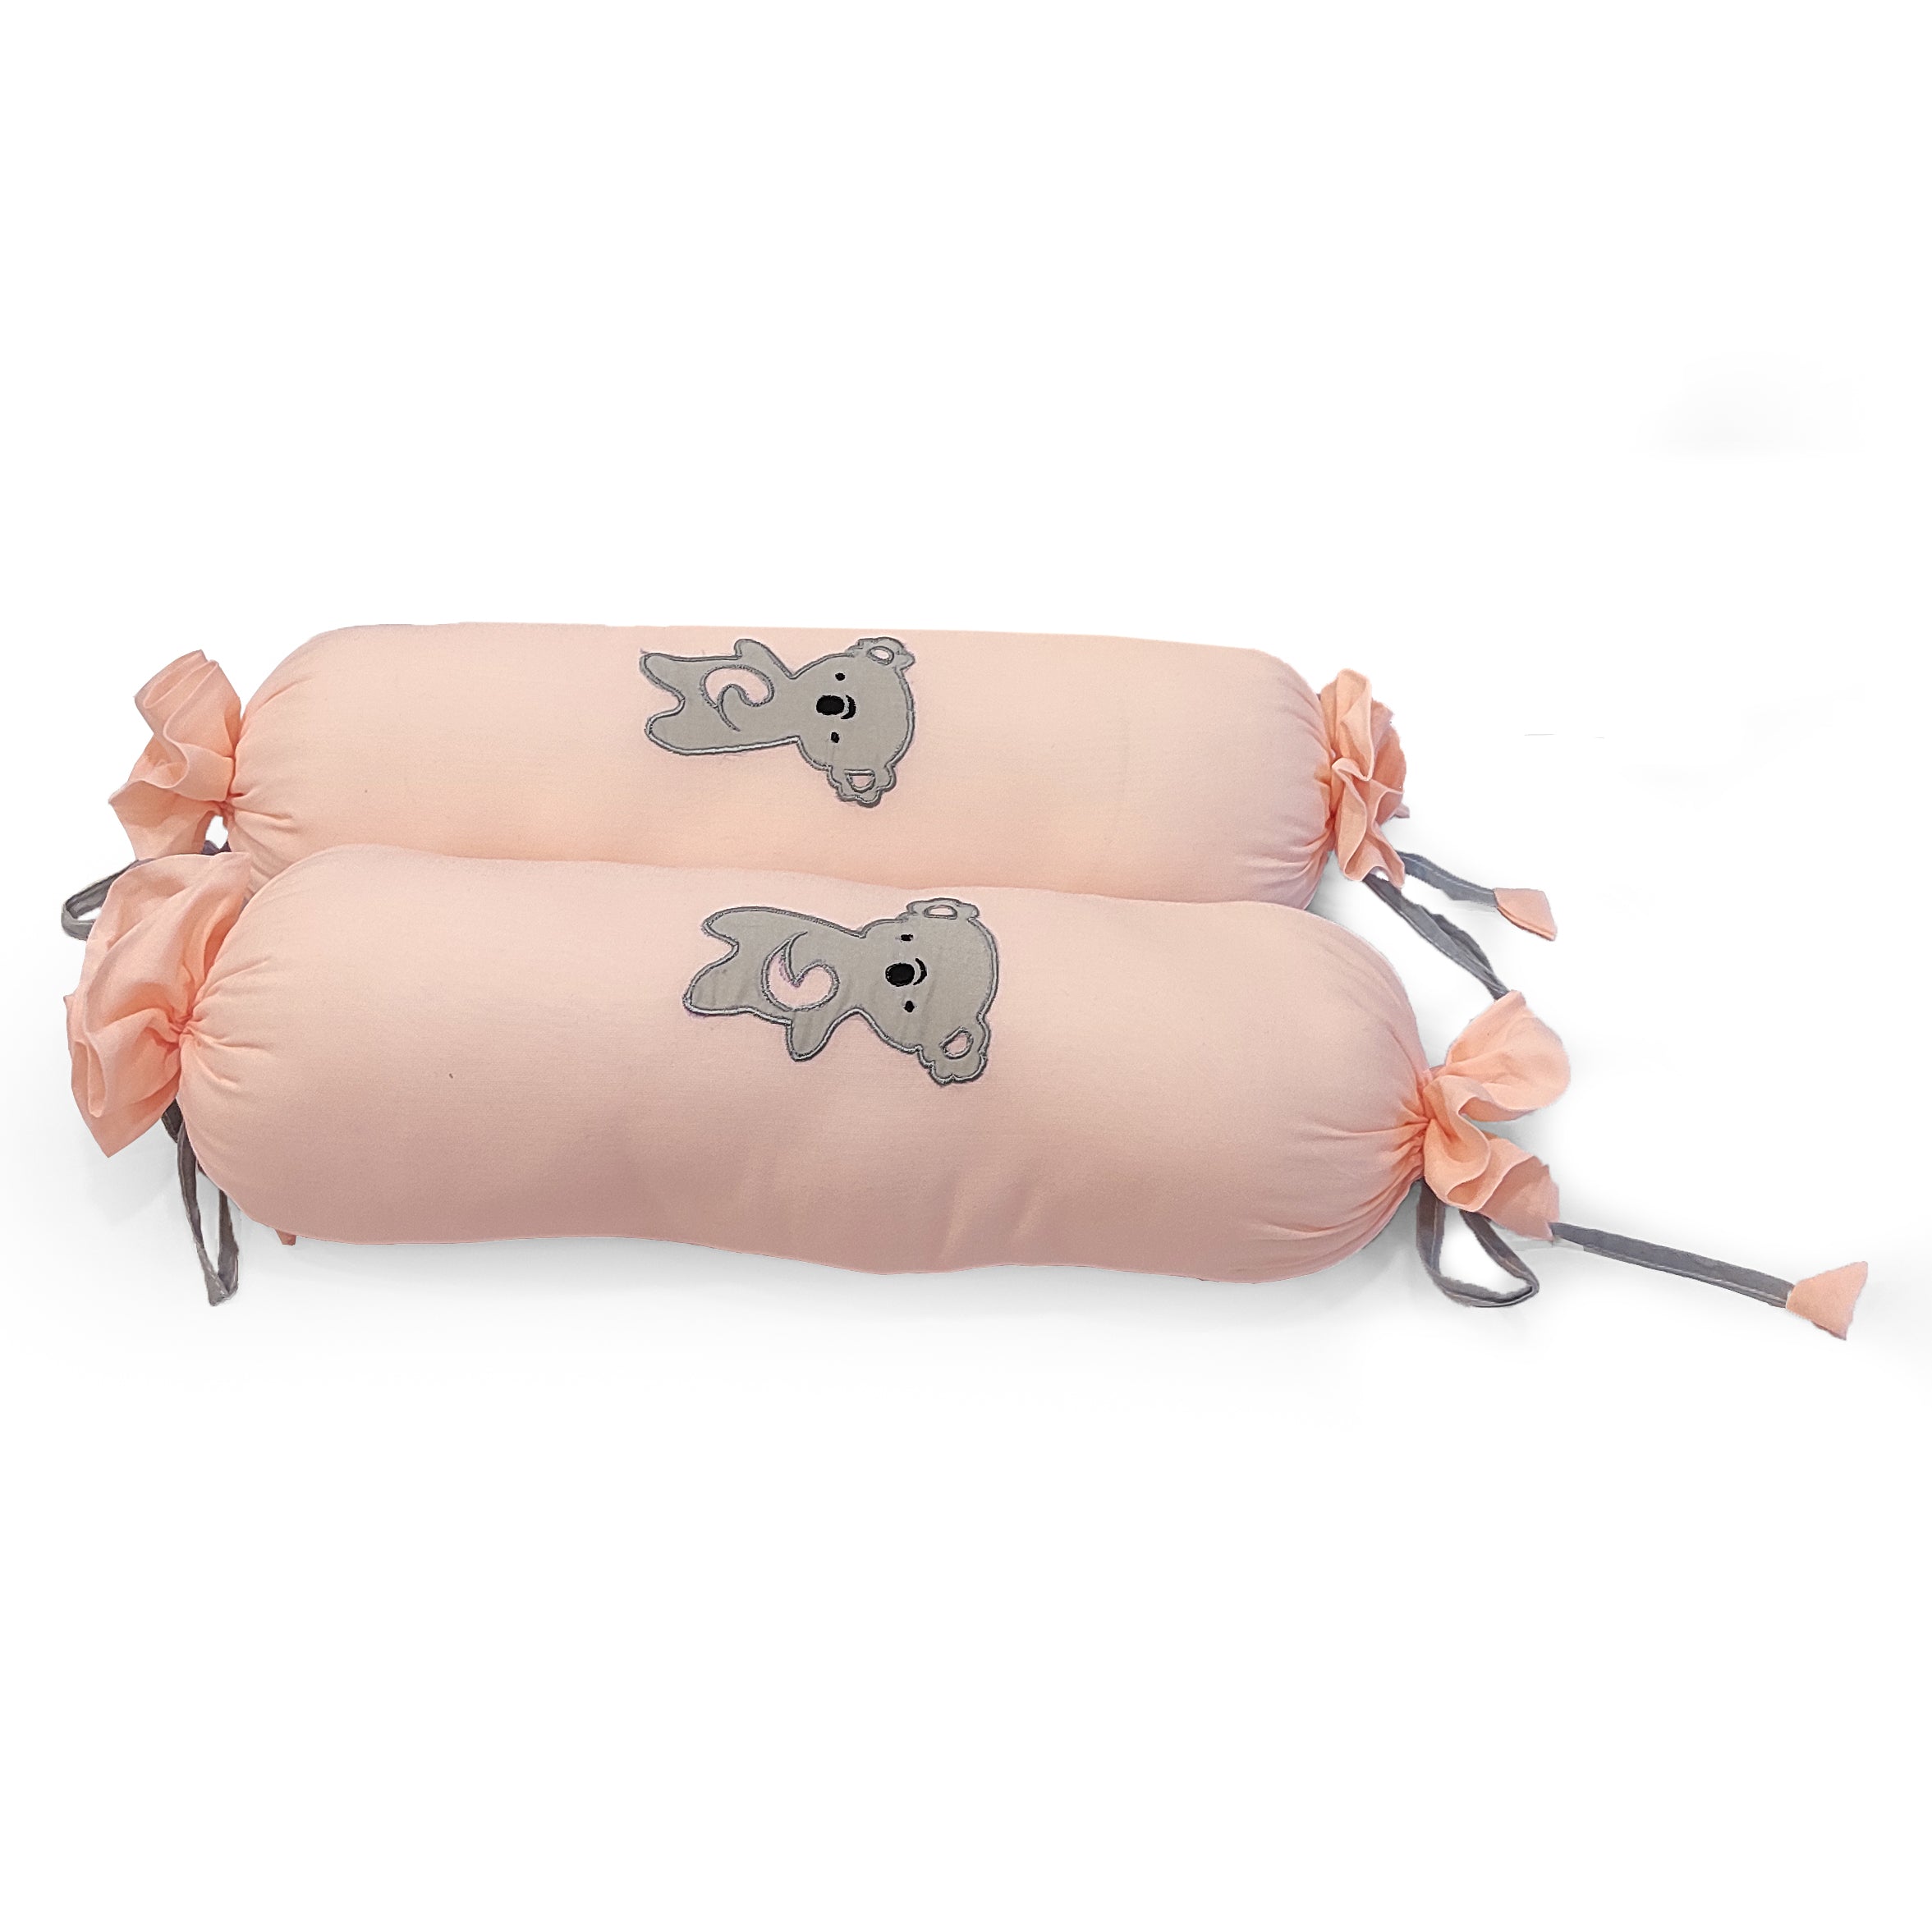 The White Cradle Cot Pillow + 2 Bolsters Set with Fillers - Organic Cotton Fabric, Softest Fiber Filling, Protective Comfort - Pink Koala